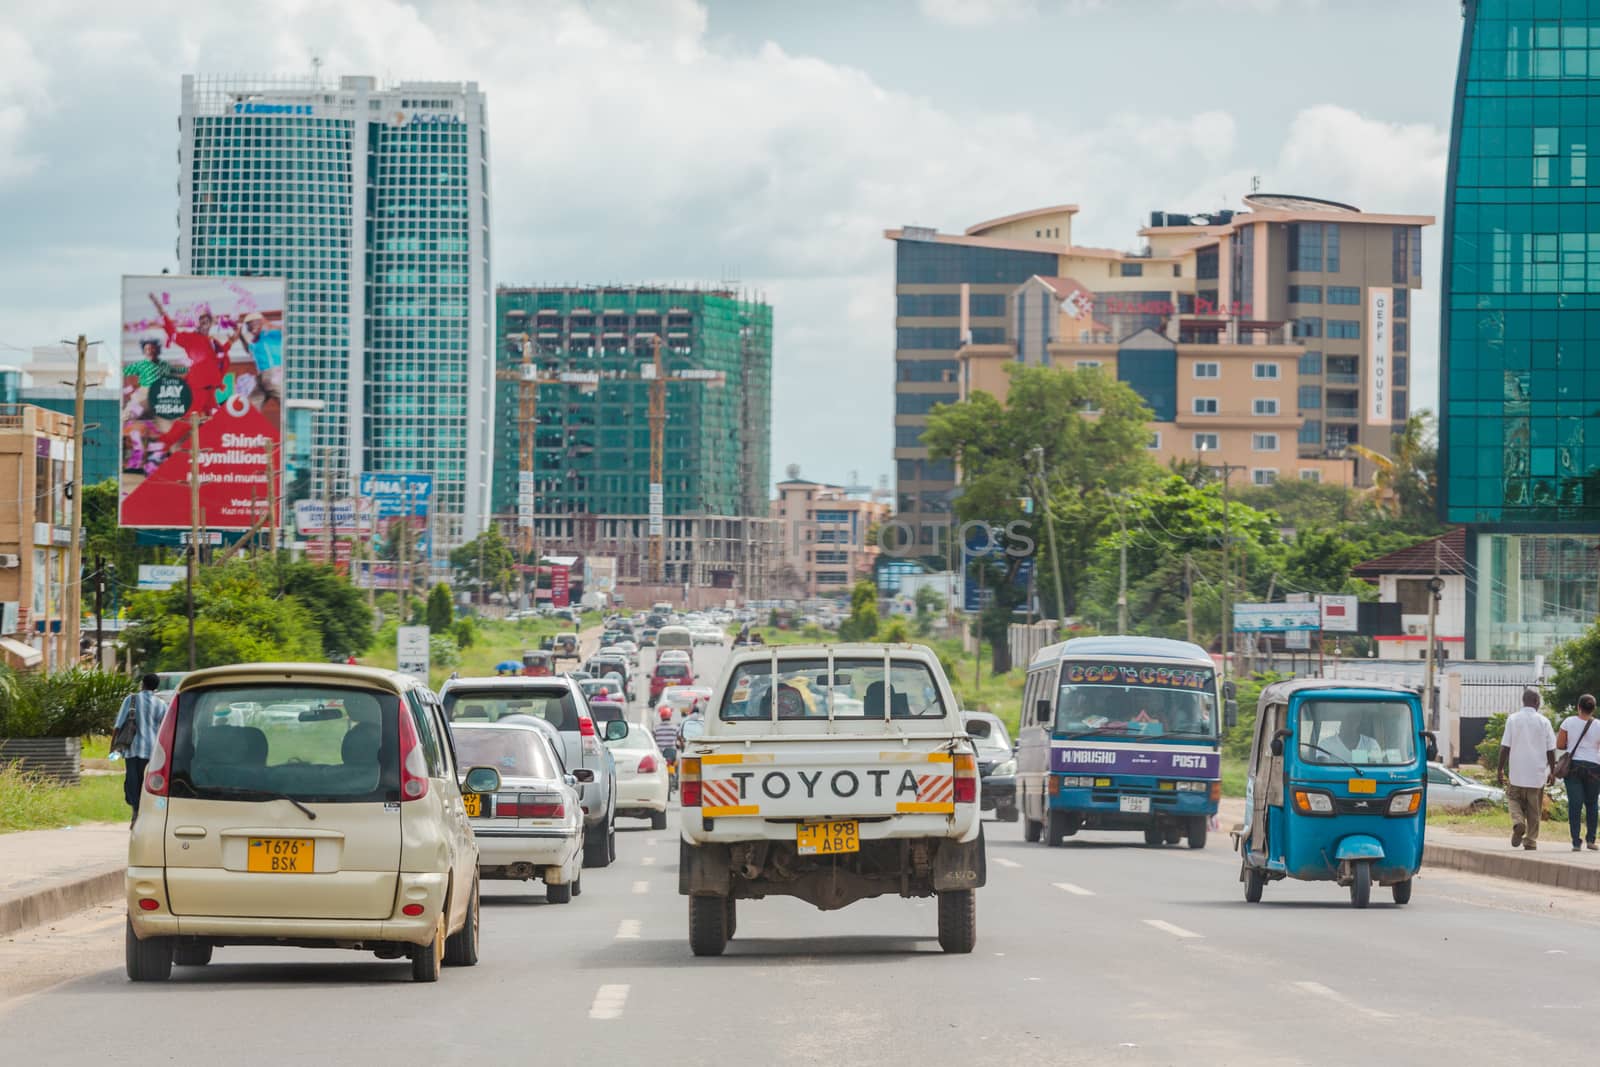 Dar Es Salaam: April 22: Traffic slows down travellers on the busy streets of Downtown Dar Es Salaam on April 22, 2015 in Dar Es Salaam, Tanzania